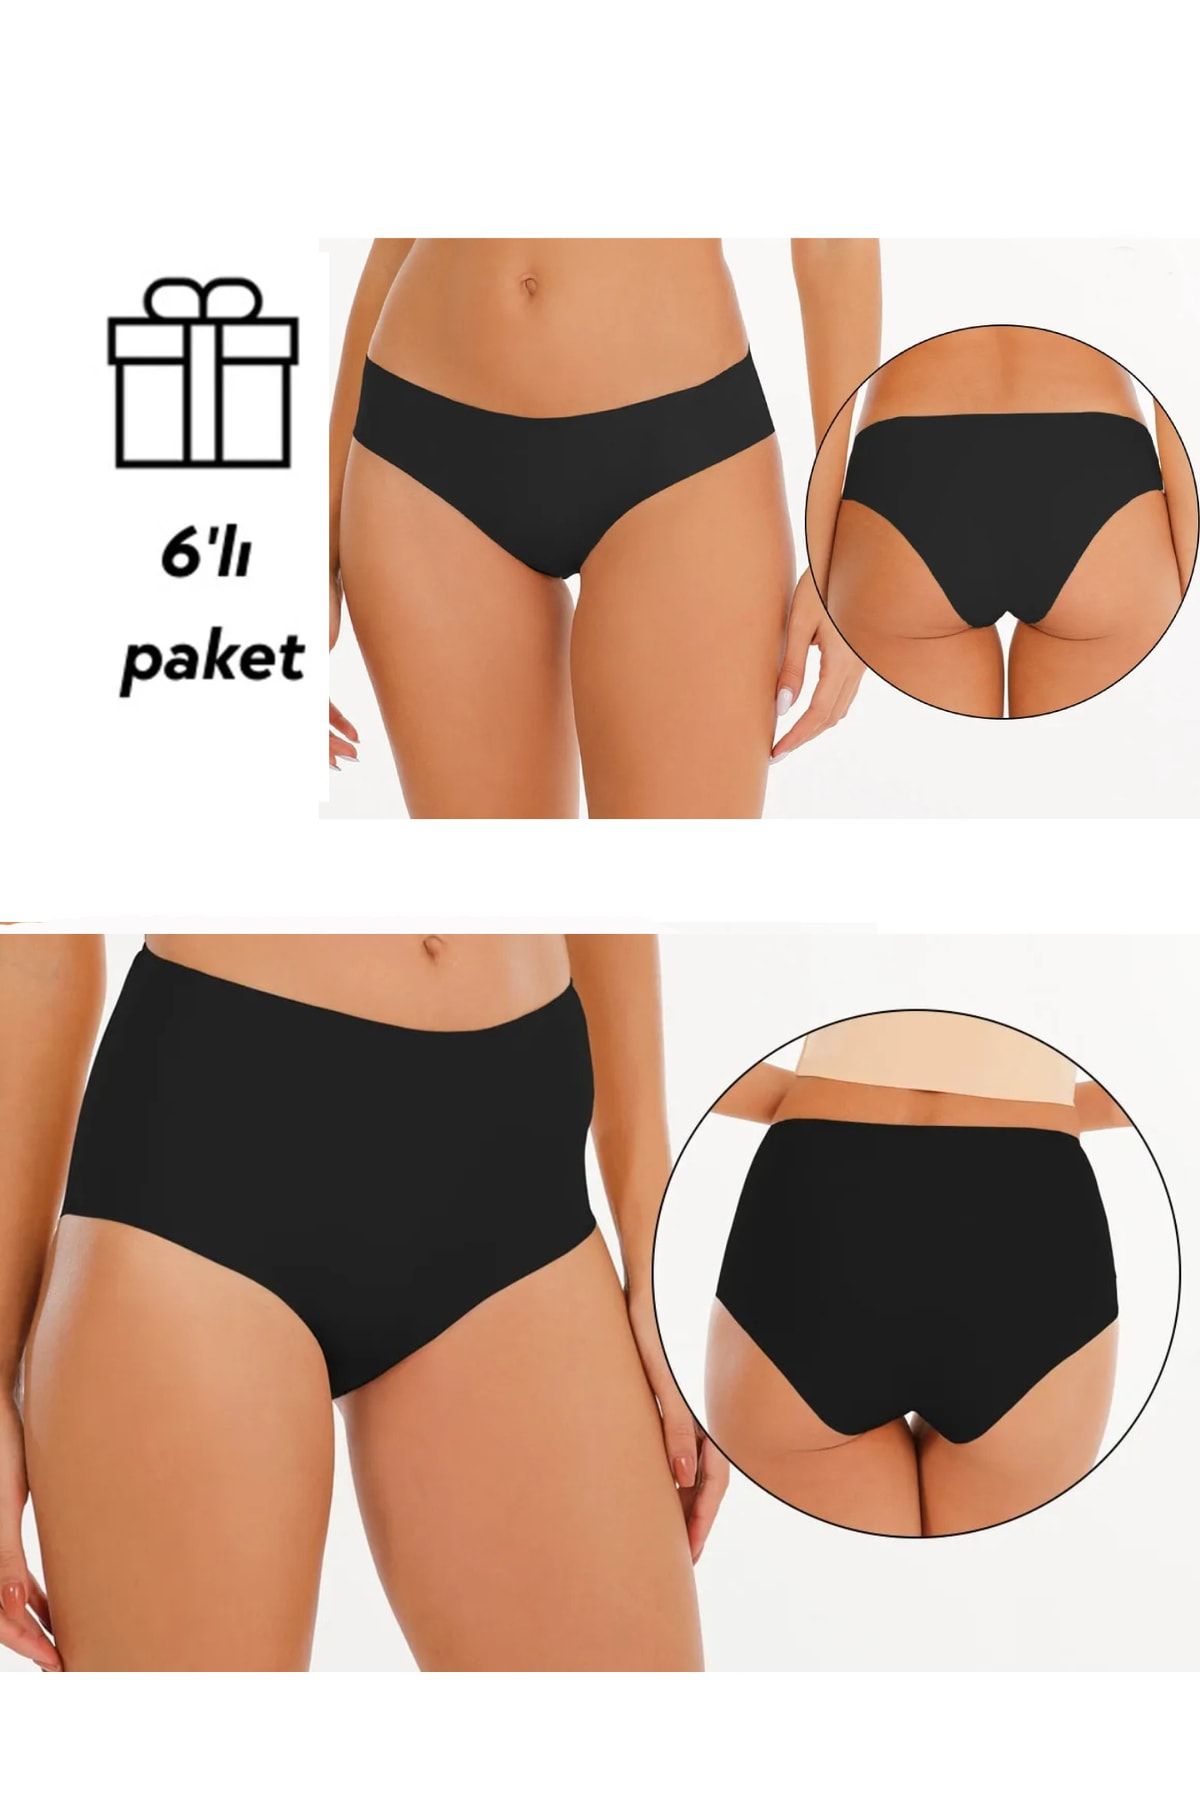 Yenicici Seamless Panties 2 Separate Models 6 Pieces Women's